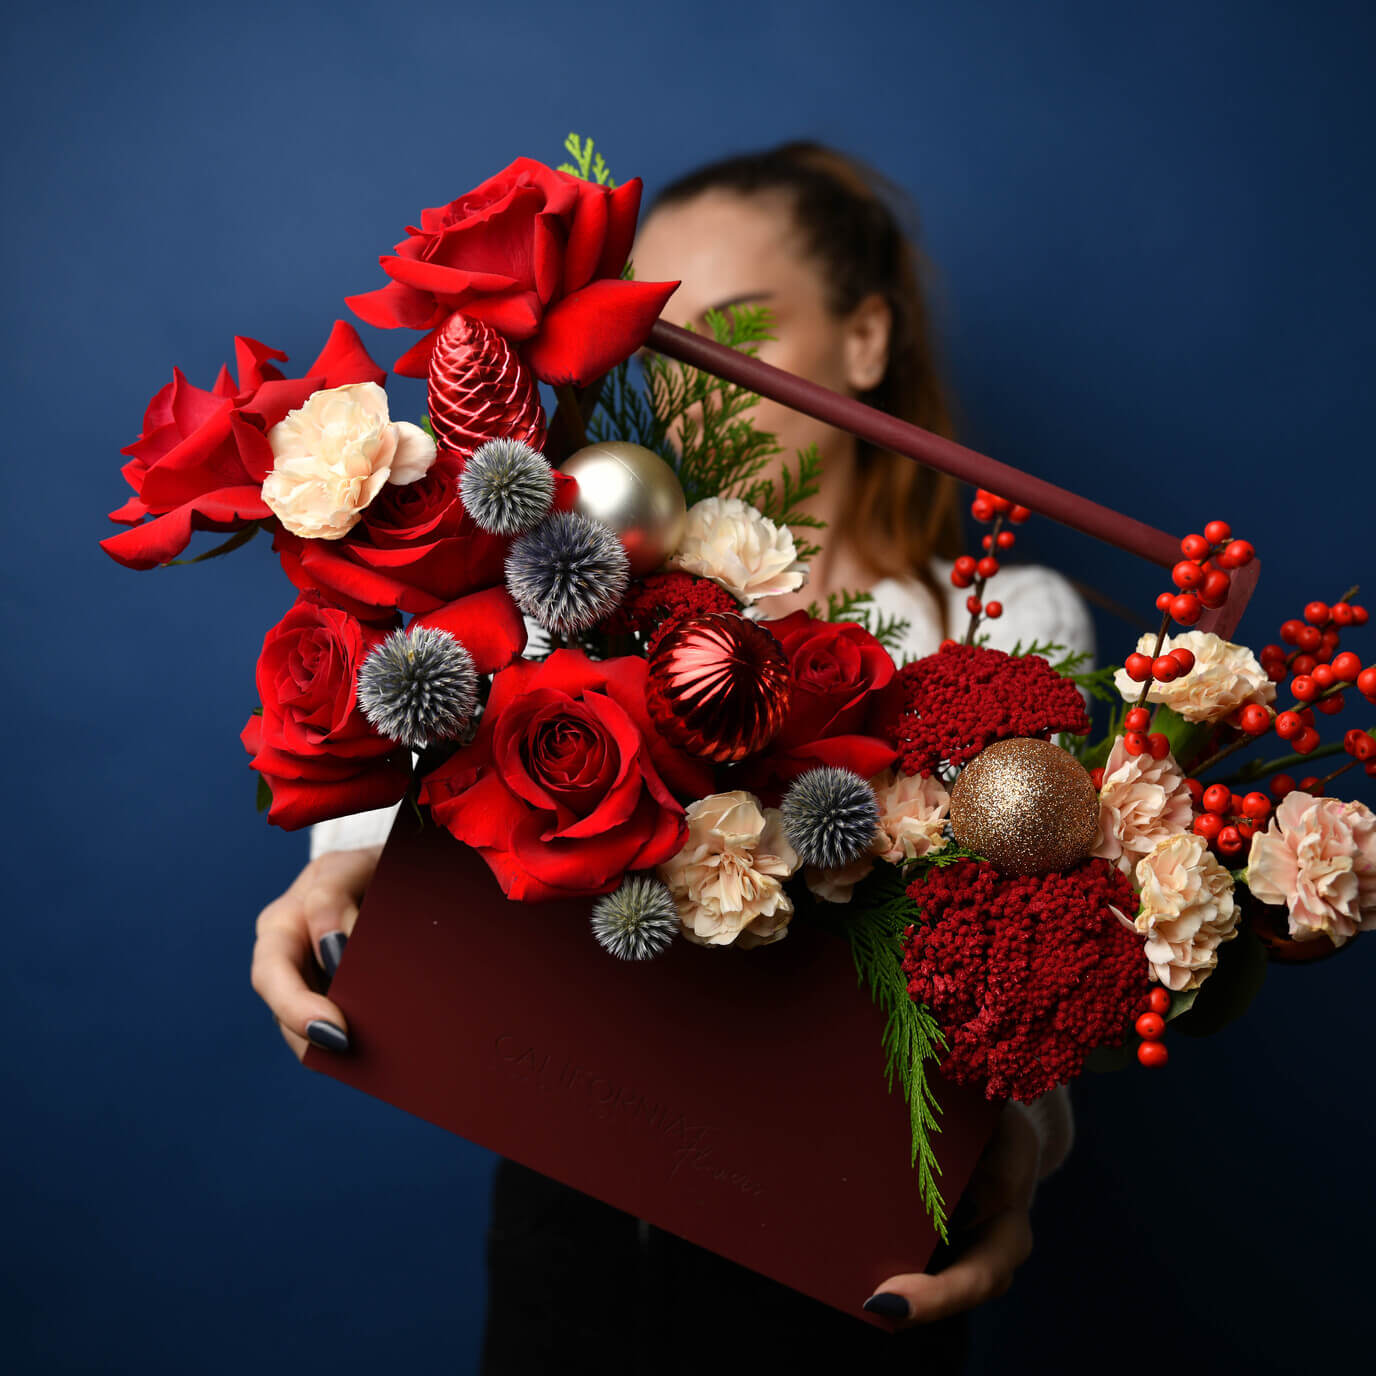 Christmas arrangement with red roses